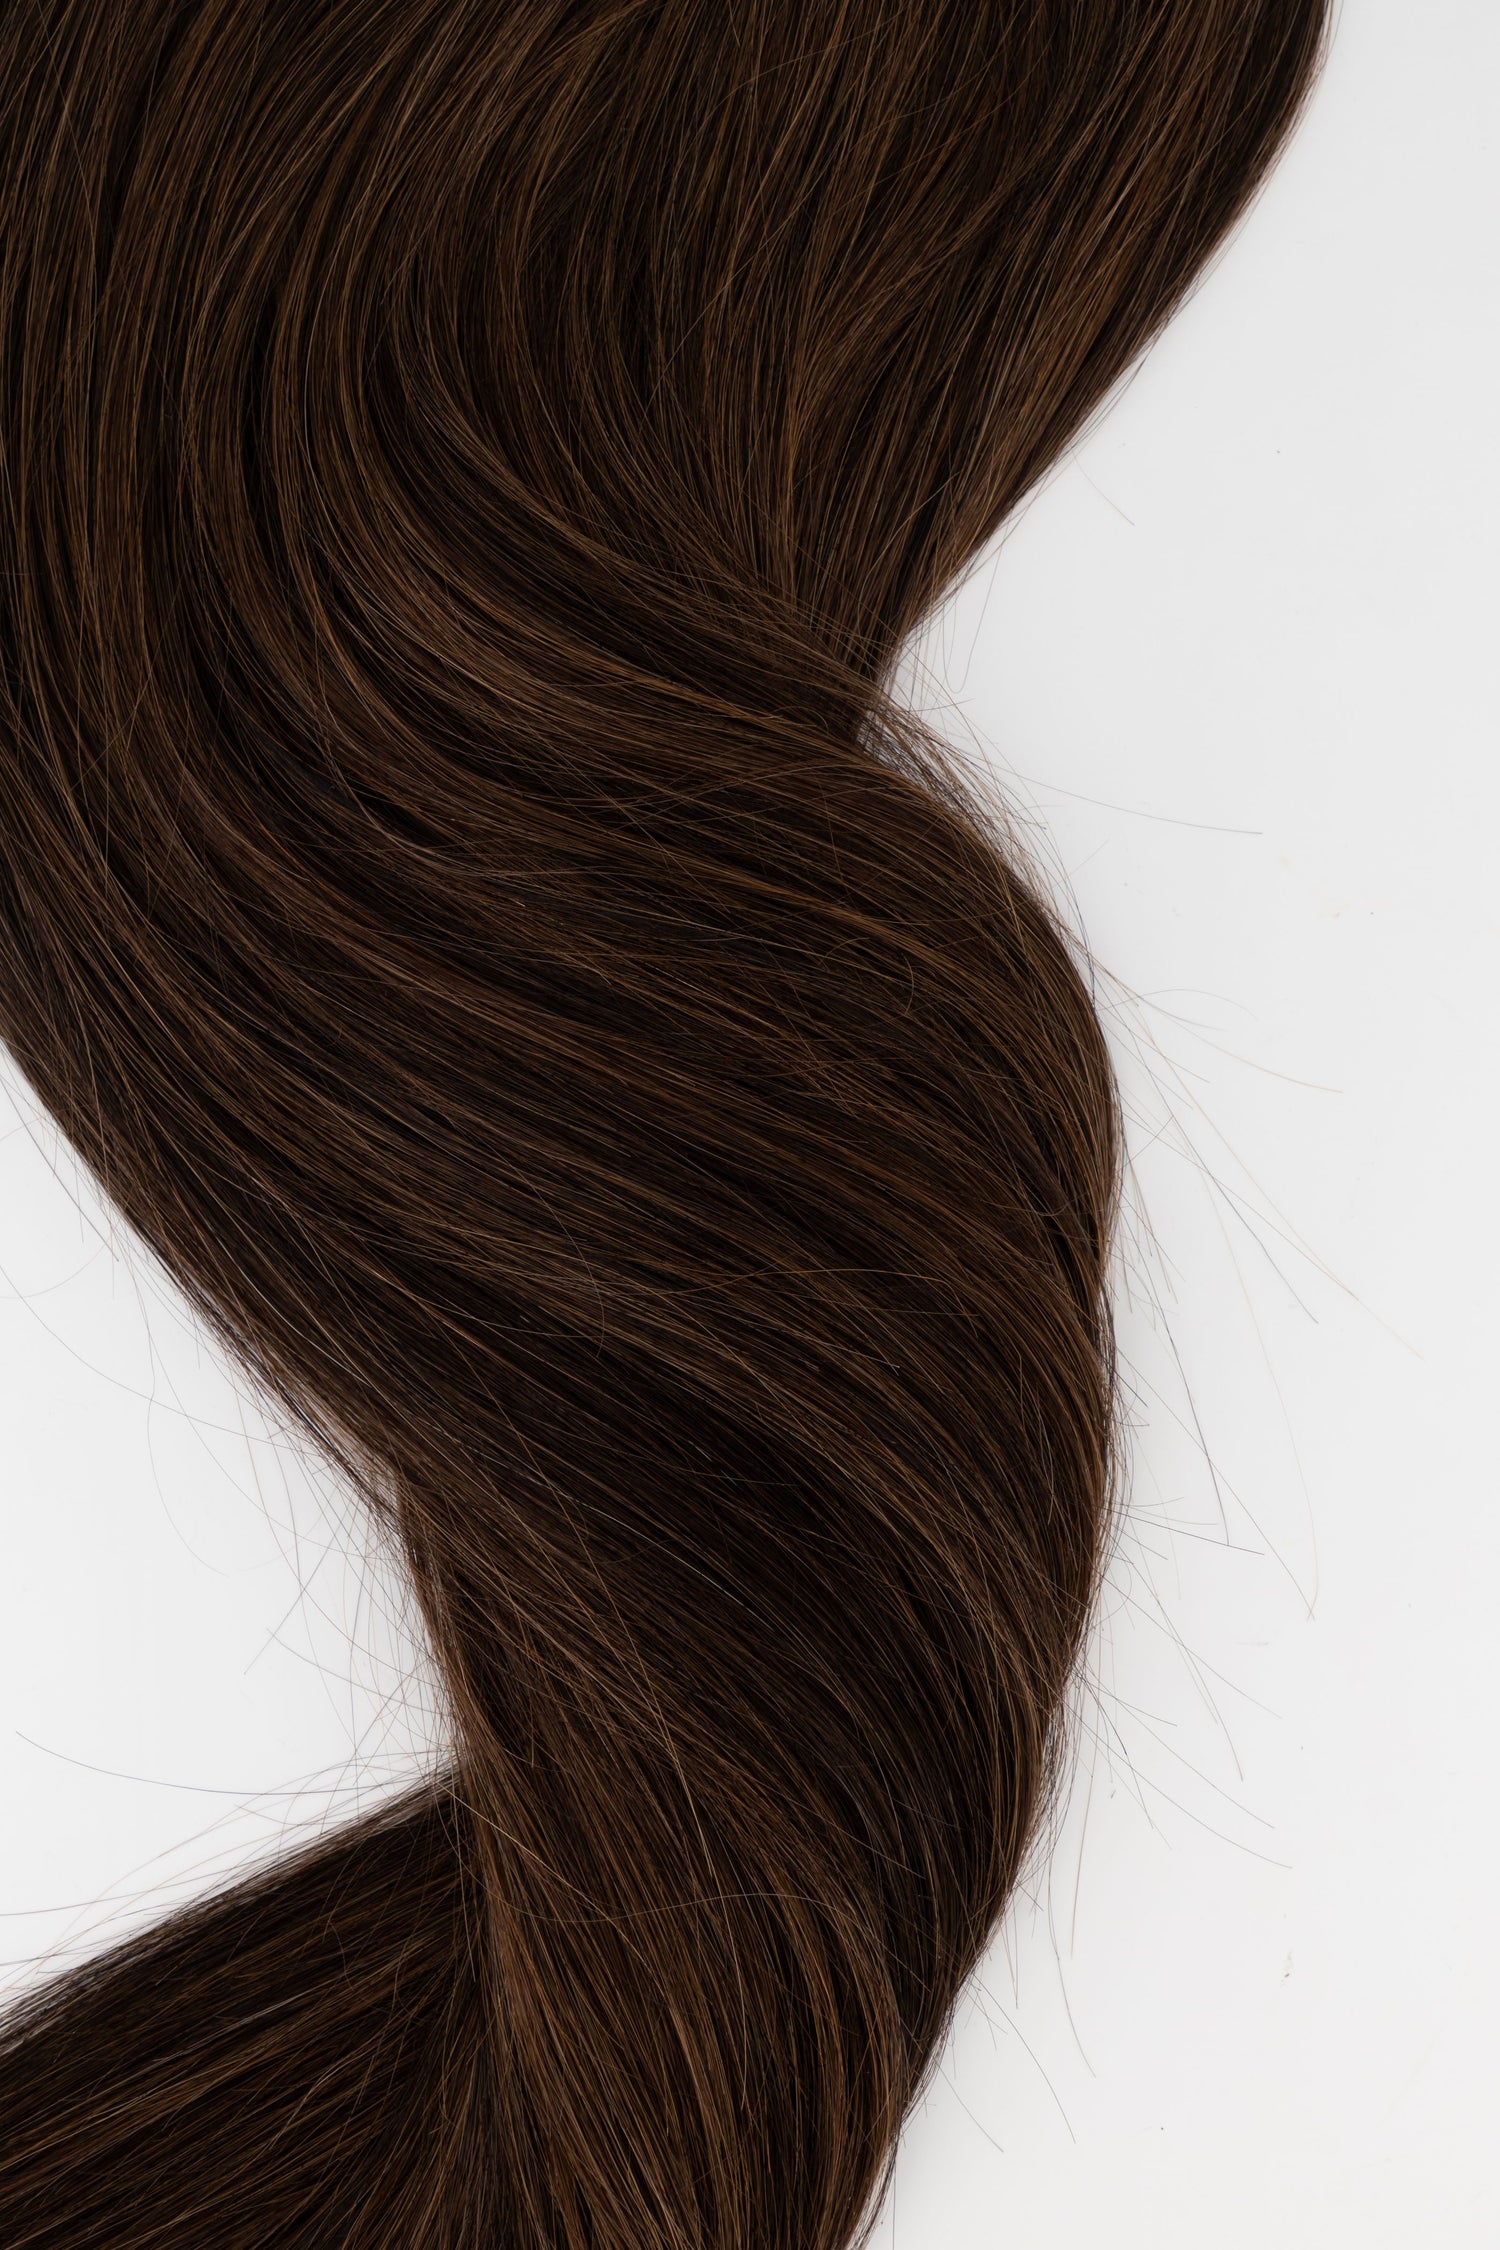 Frontrow clip-in hair extensions in dark brown